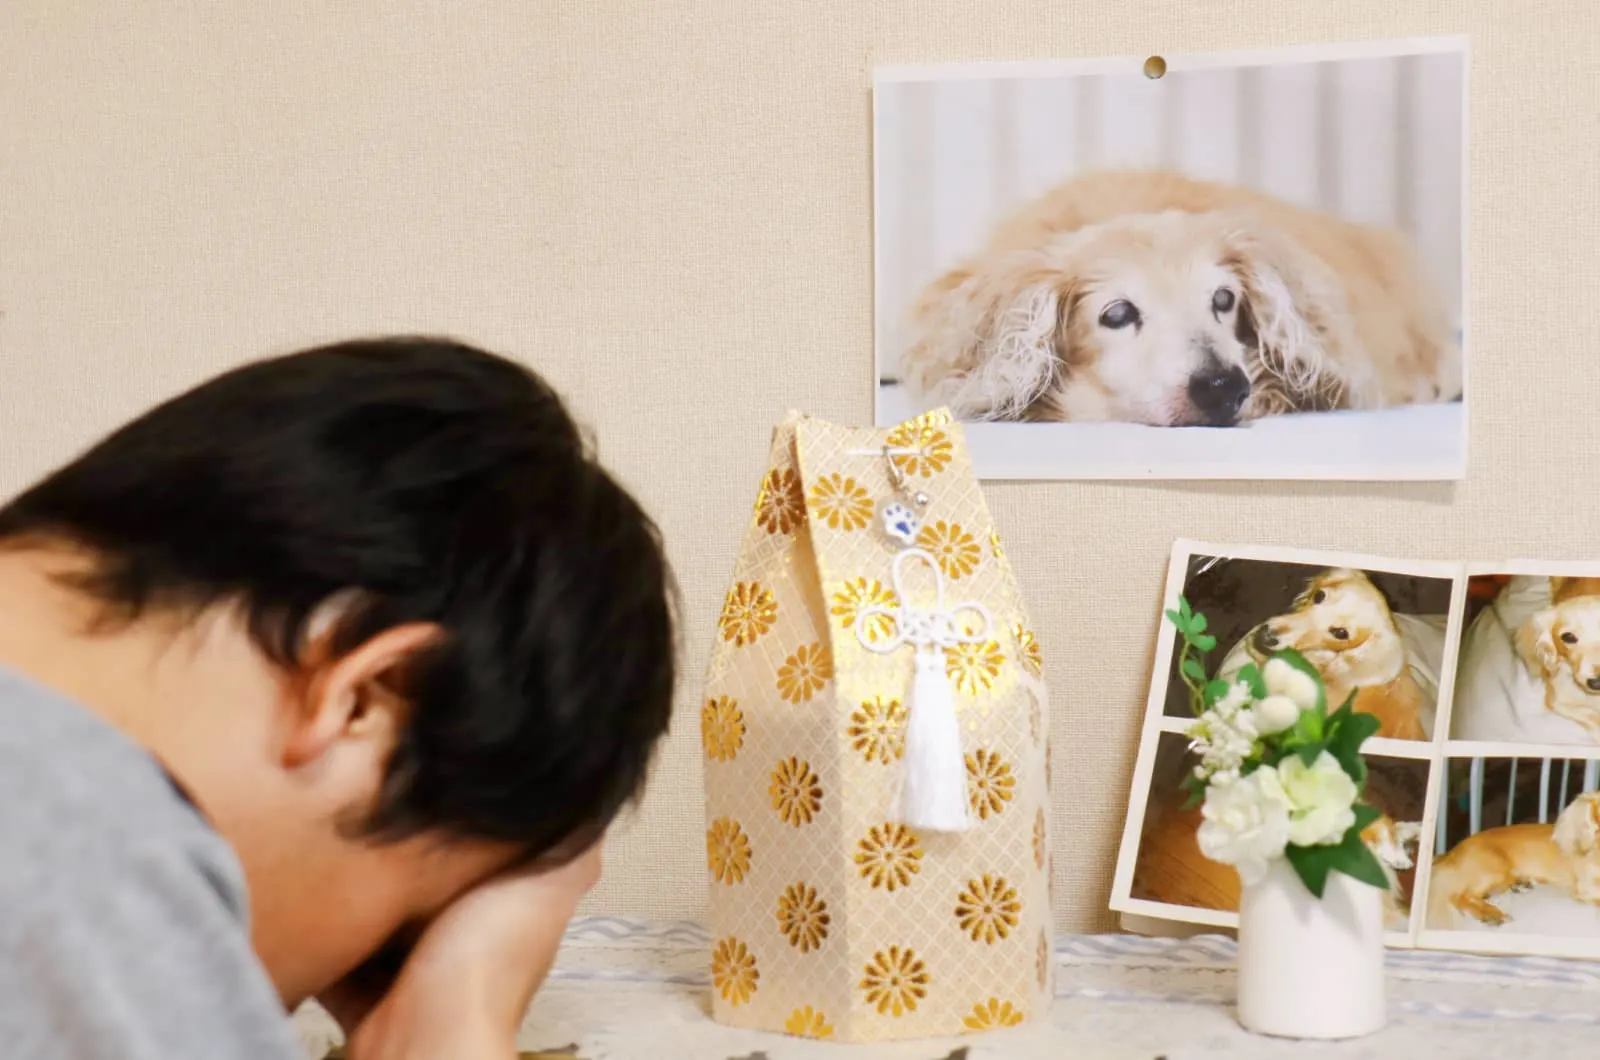 owner crying in front of his dog picture